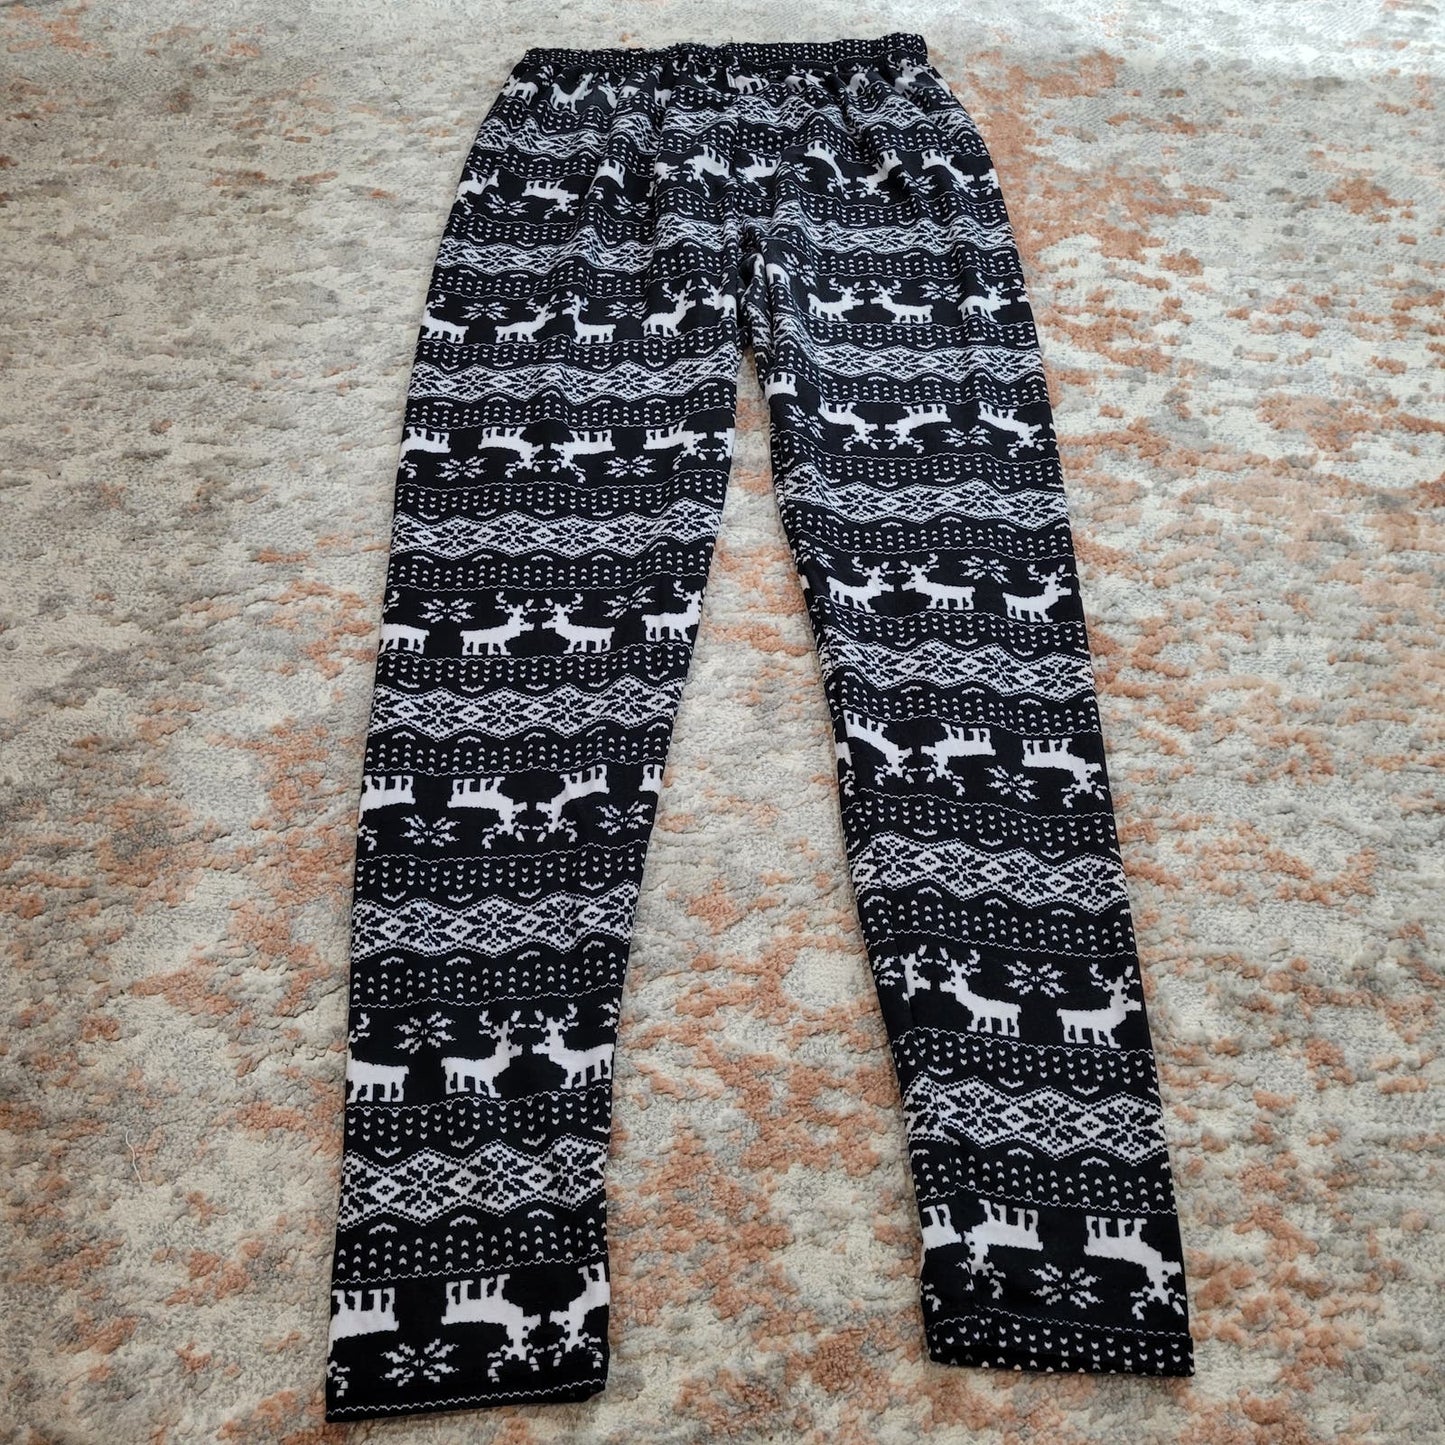 New Mix Black and White Reindeer Leggings - Plus Size (1X-2X)